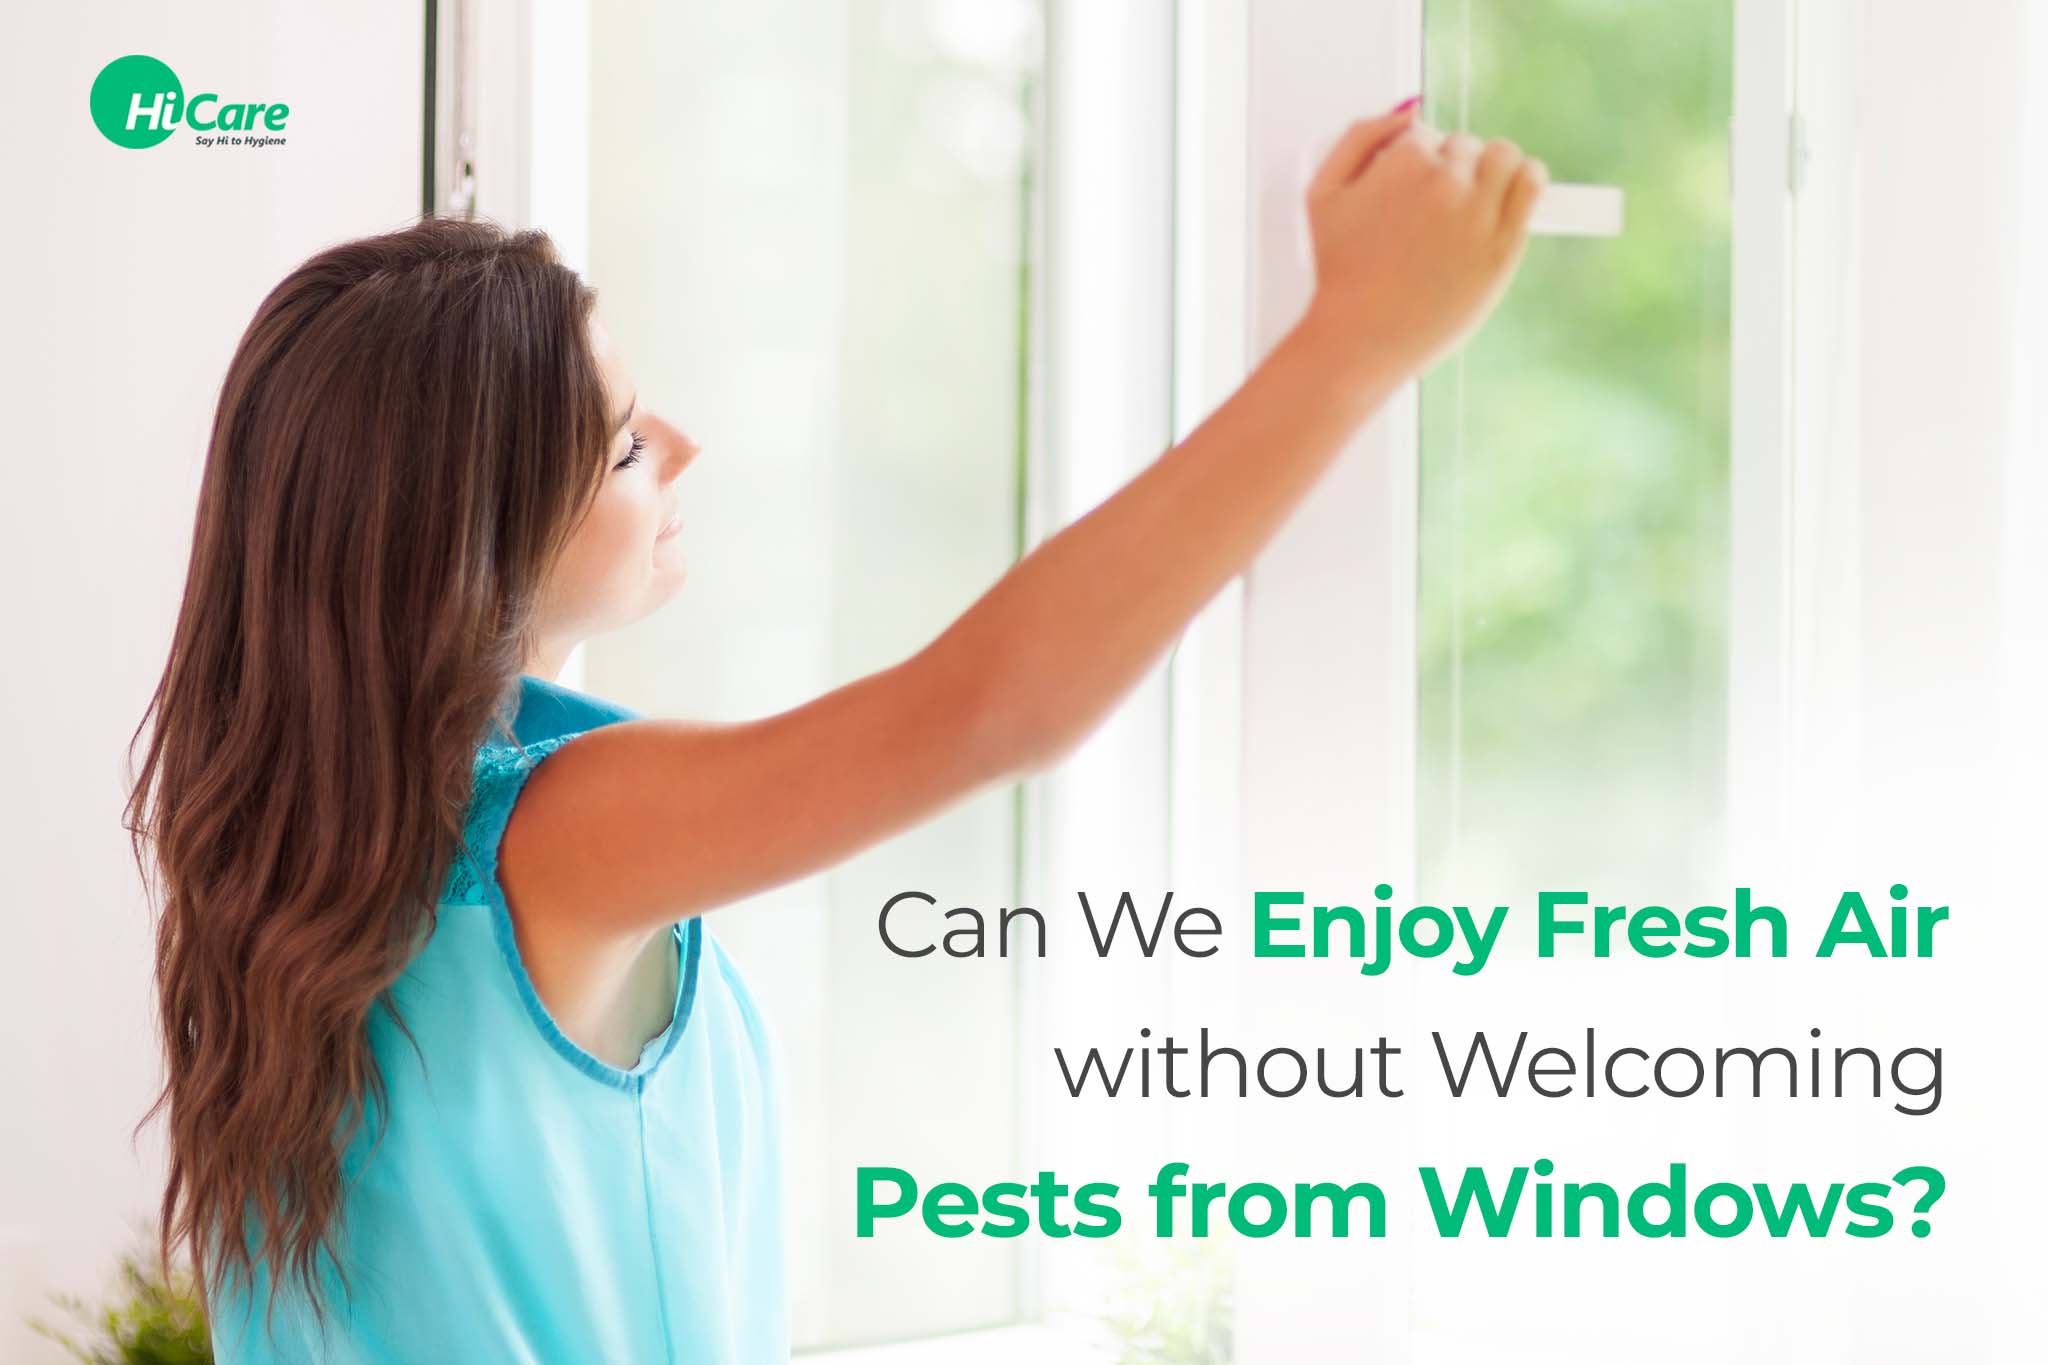 Can We Enjoy Fresh Air without Welcoming Pests from Windows?